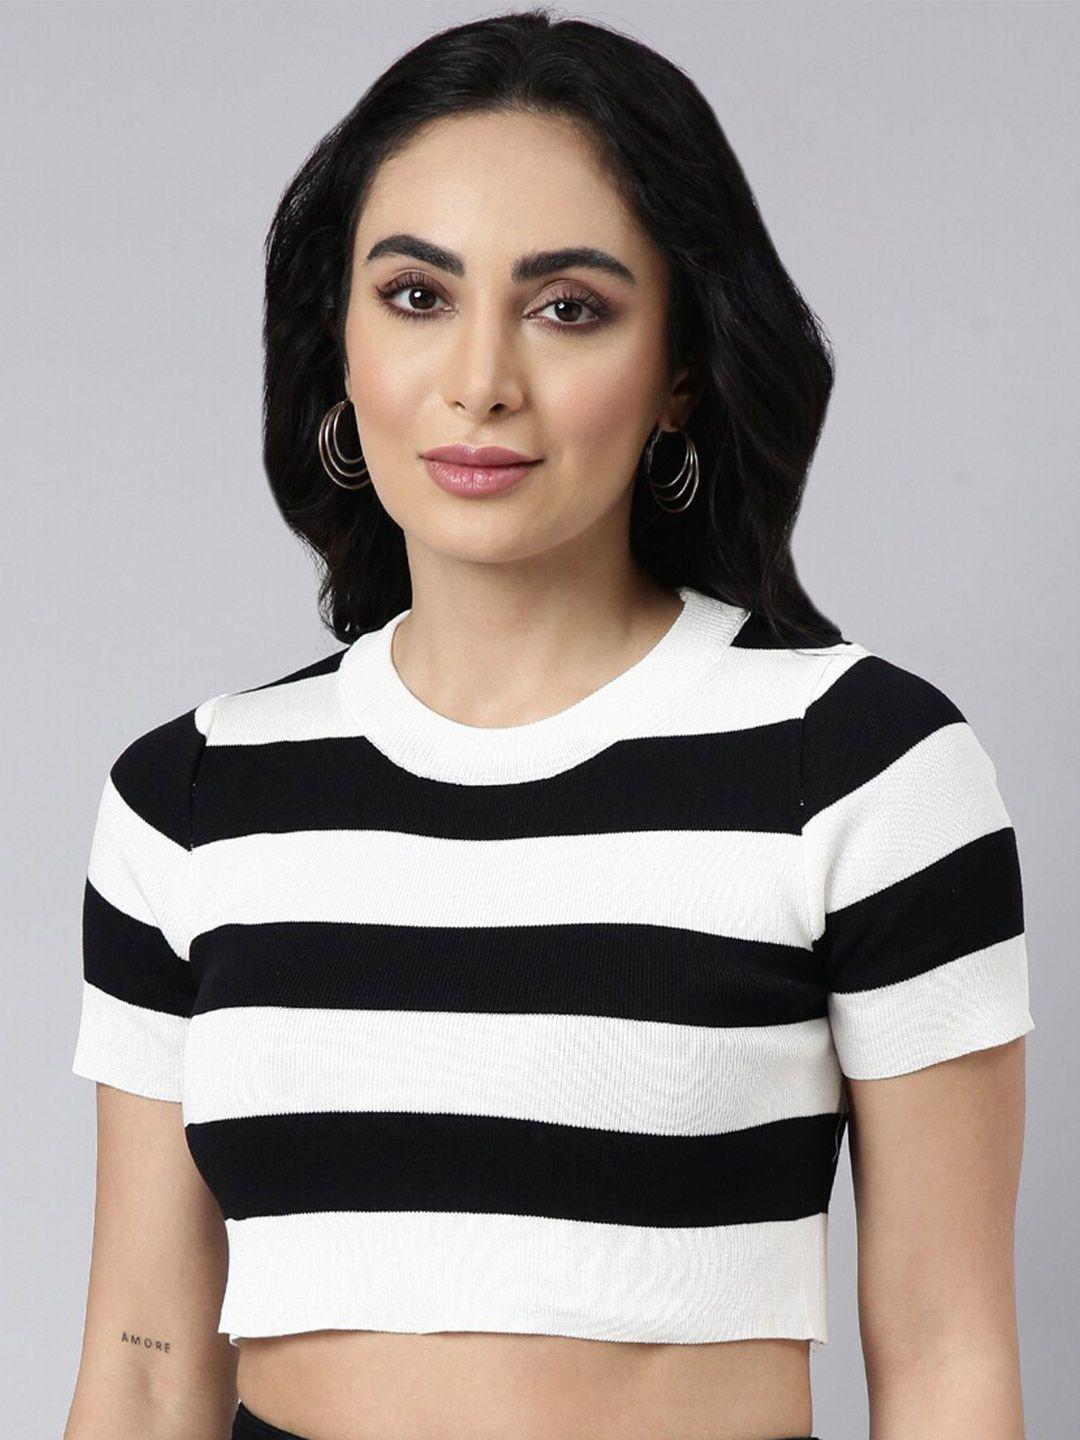 showoff horizontal stripes round neck short sleeves fitted crop top